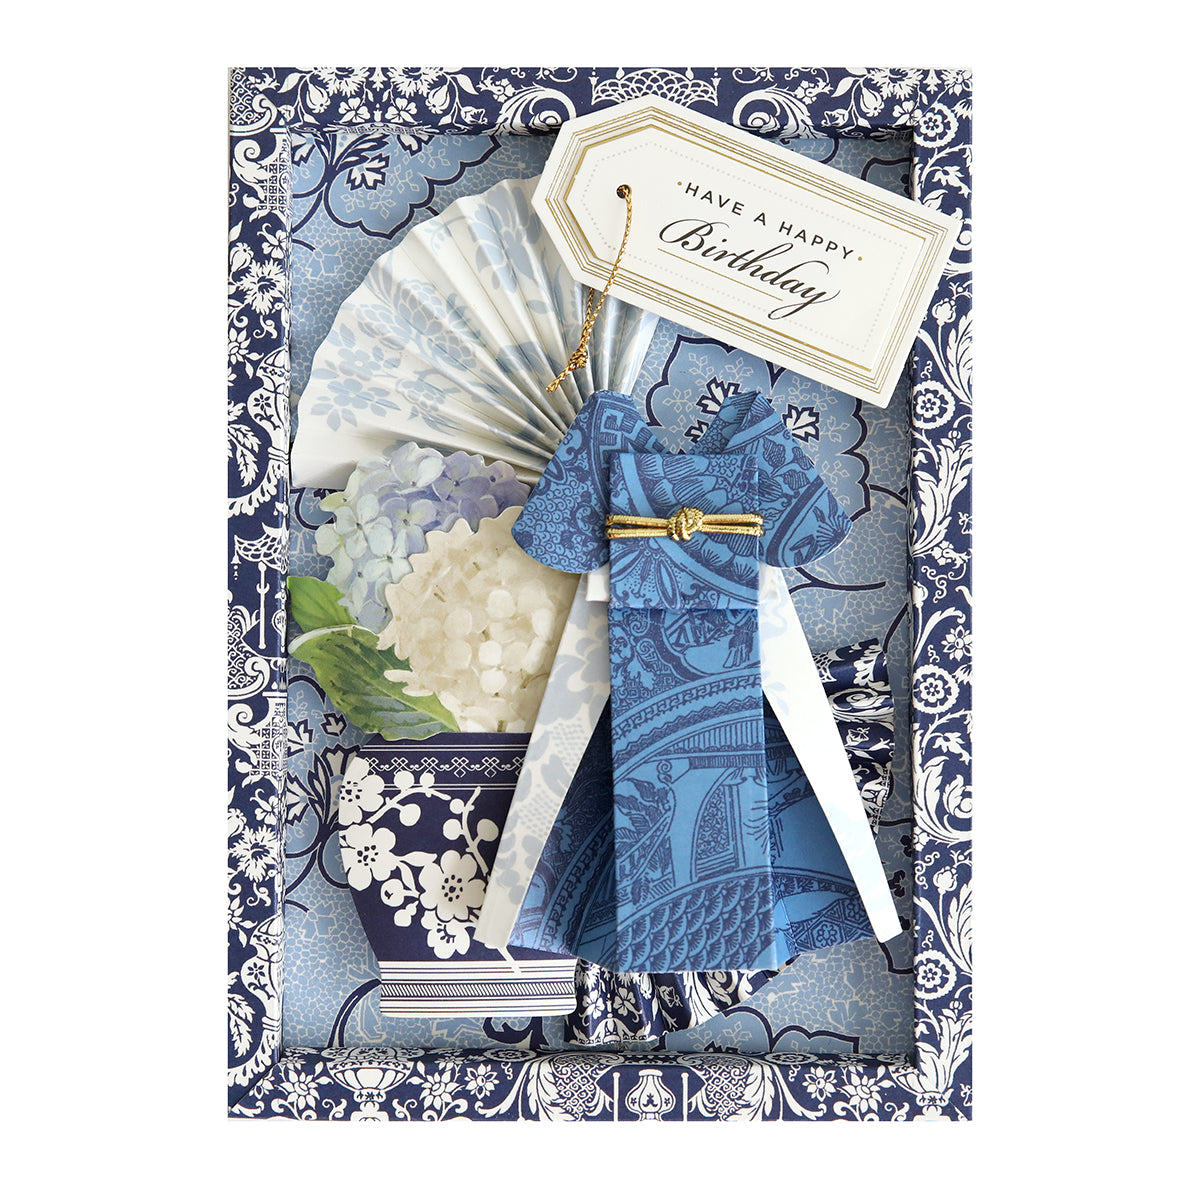 A blue and white birthday card with a fan design made using Paper Dress Dies.